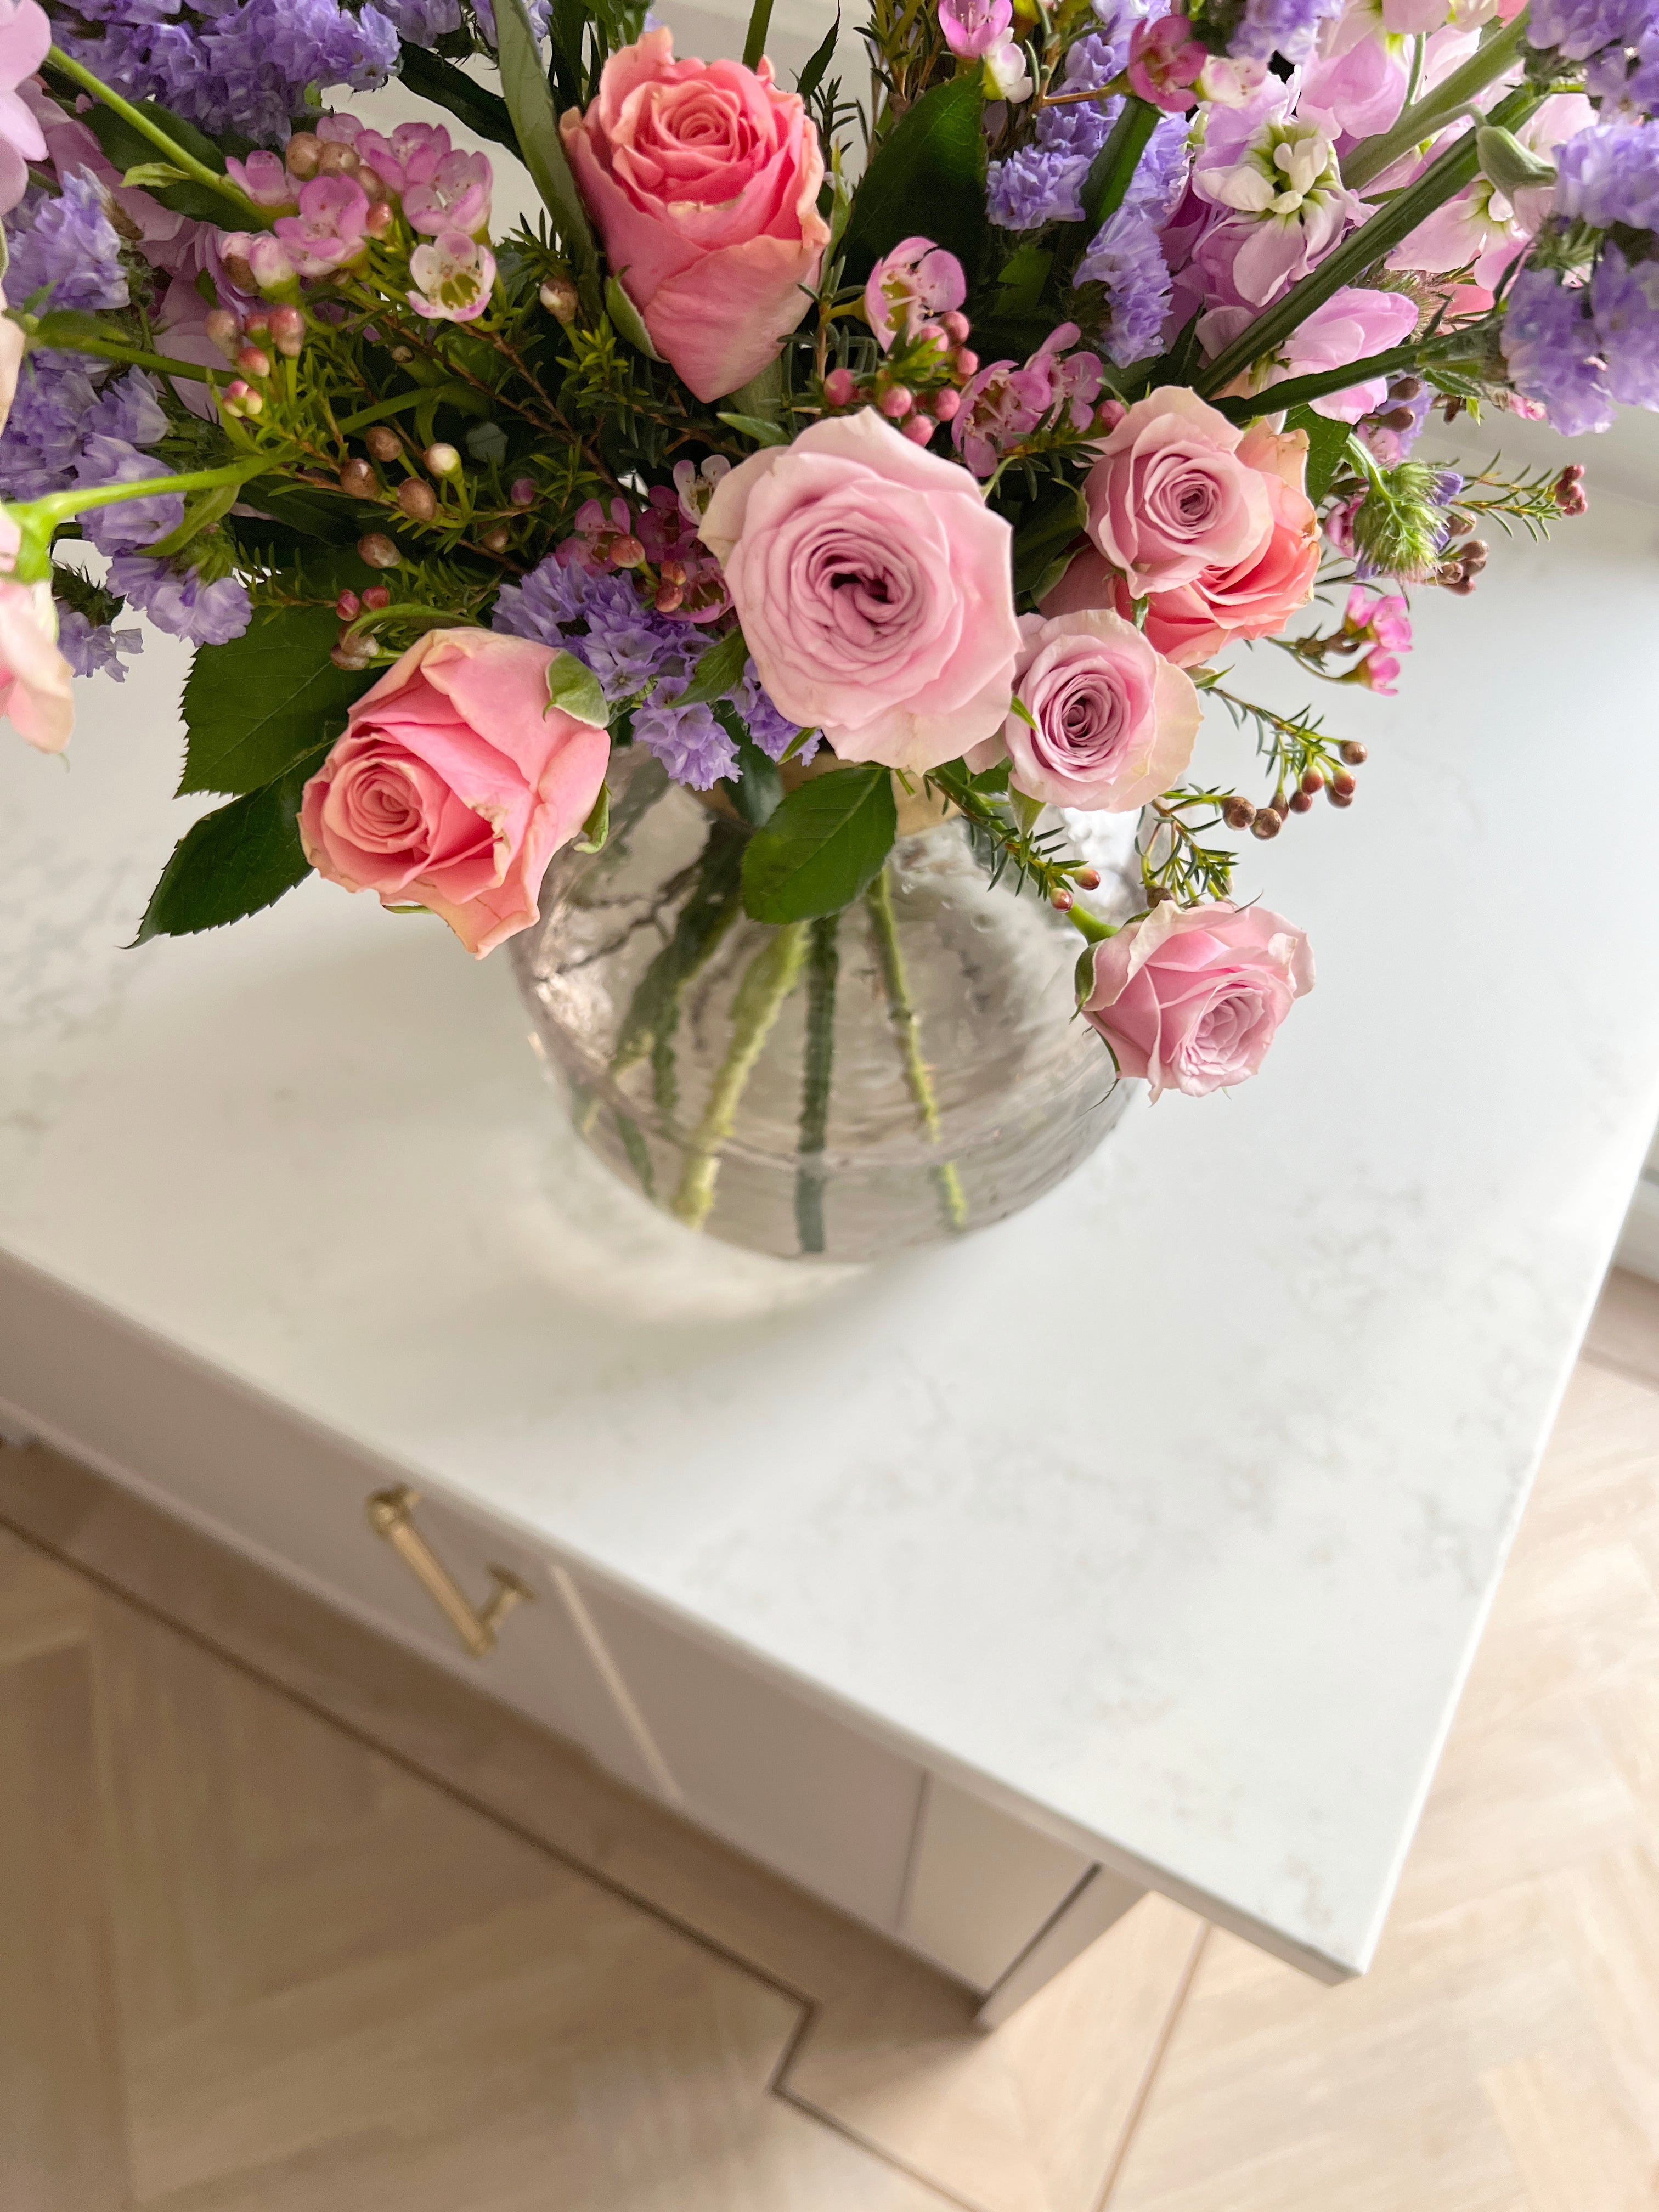 Why Flowers Make Your Day - FLOWERFIX